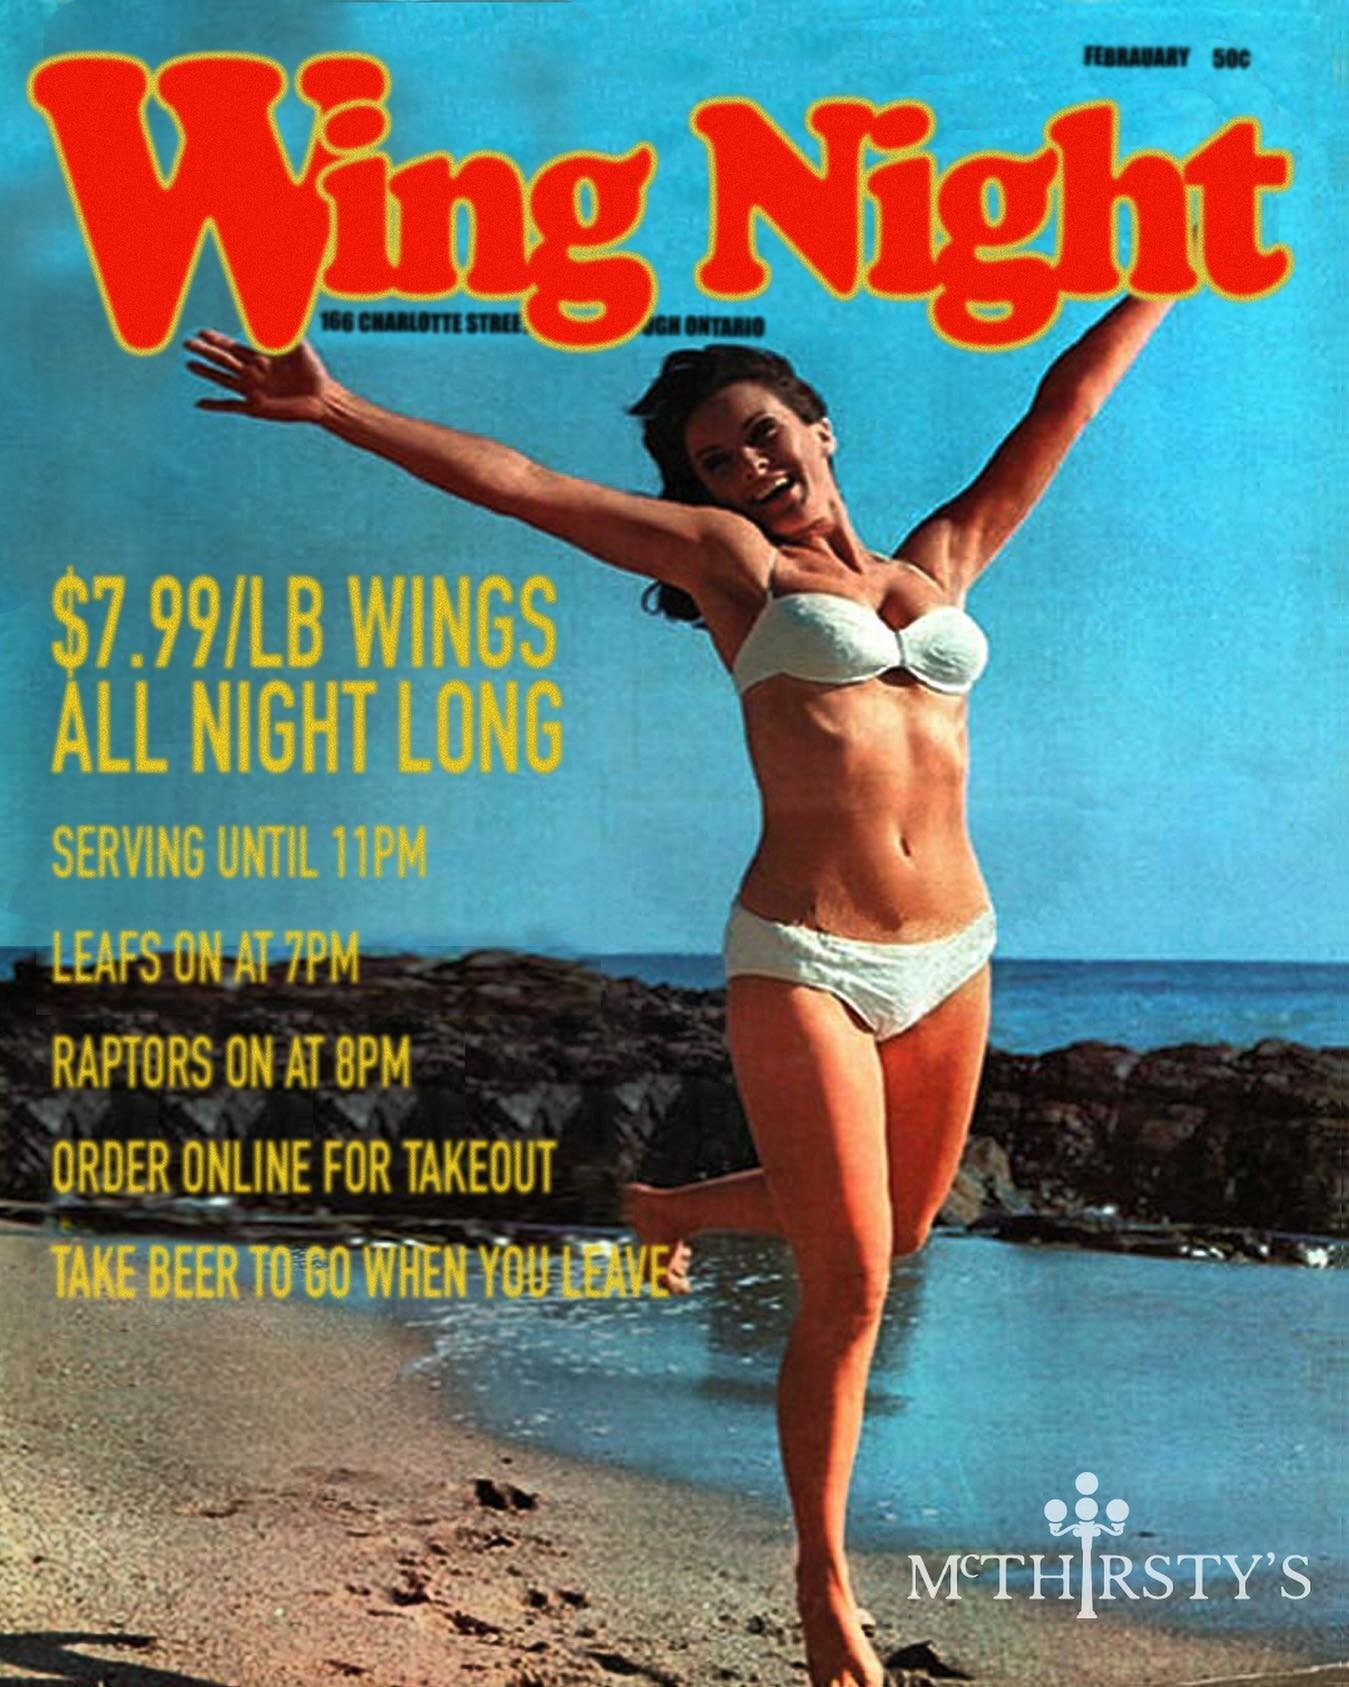 $7.99/lb wings all night long until 11pm